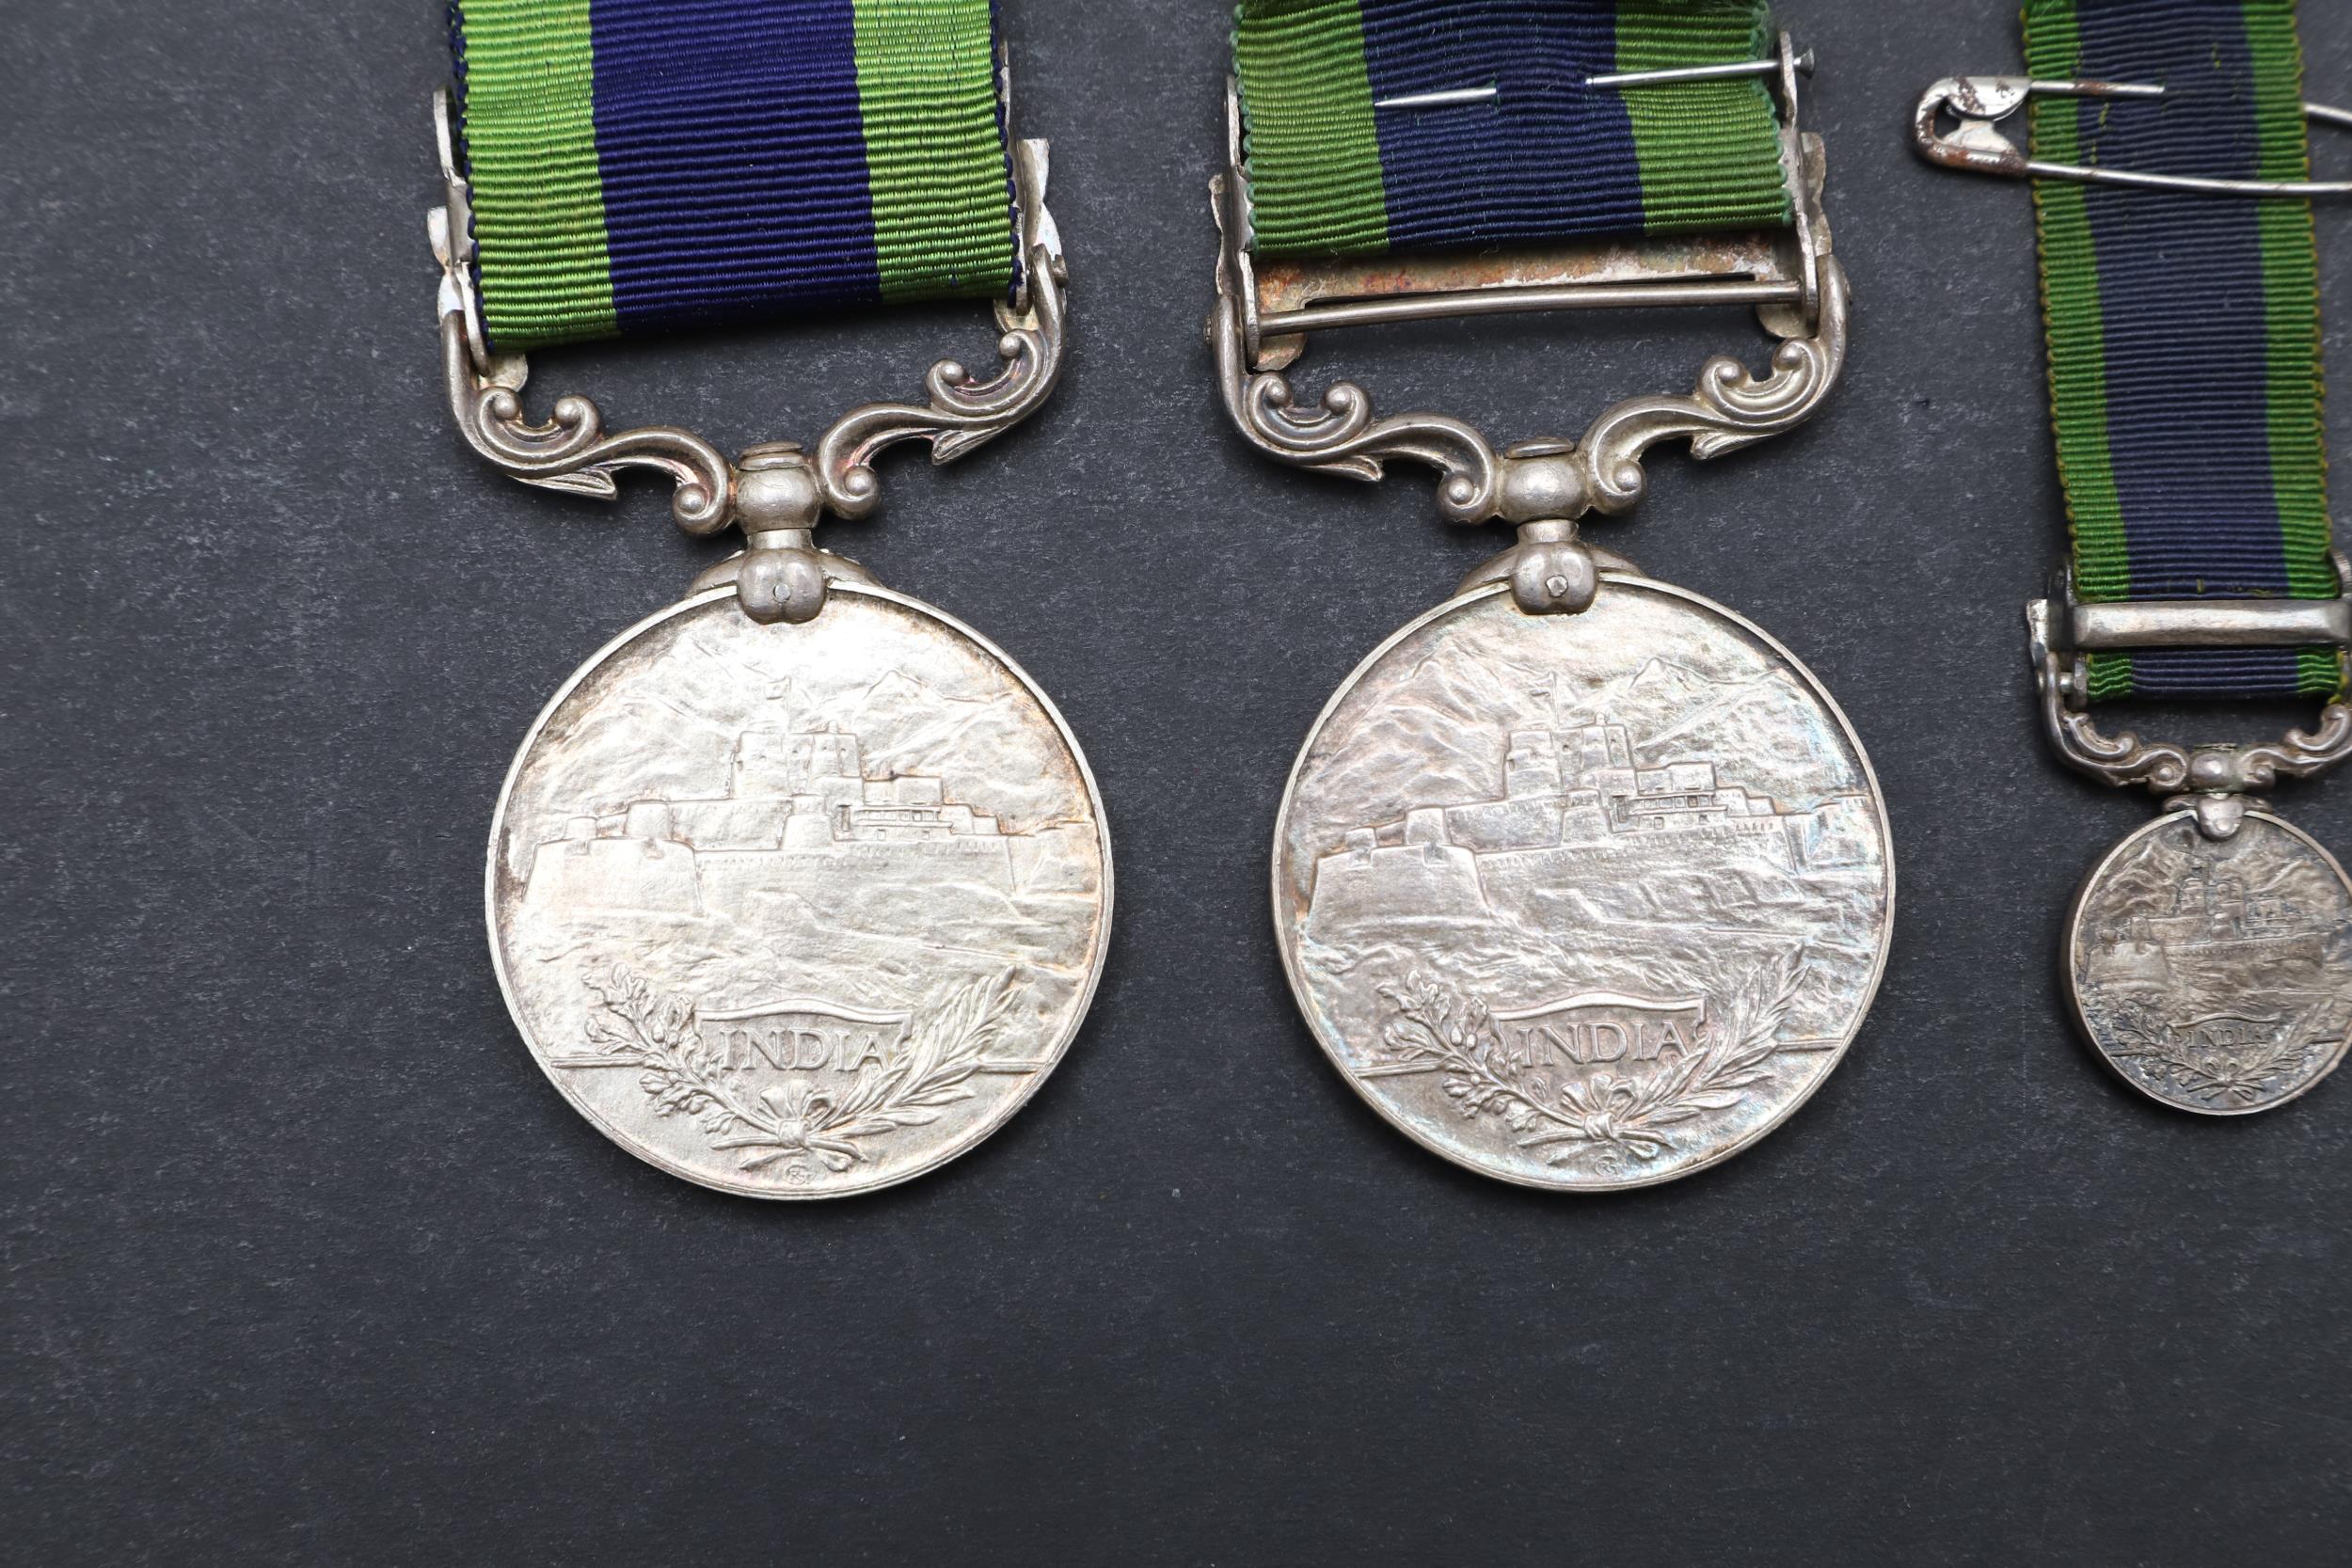 TWO INDIA GENERAL SERVICE MEDALS APPARENTLY AWARDED TO THE SAME MAN, A CASUALTY OF A BOMBING INCIDEN - Bild 6 aus 8